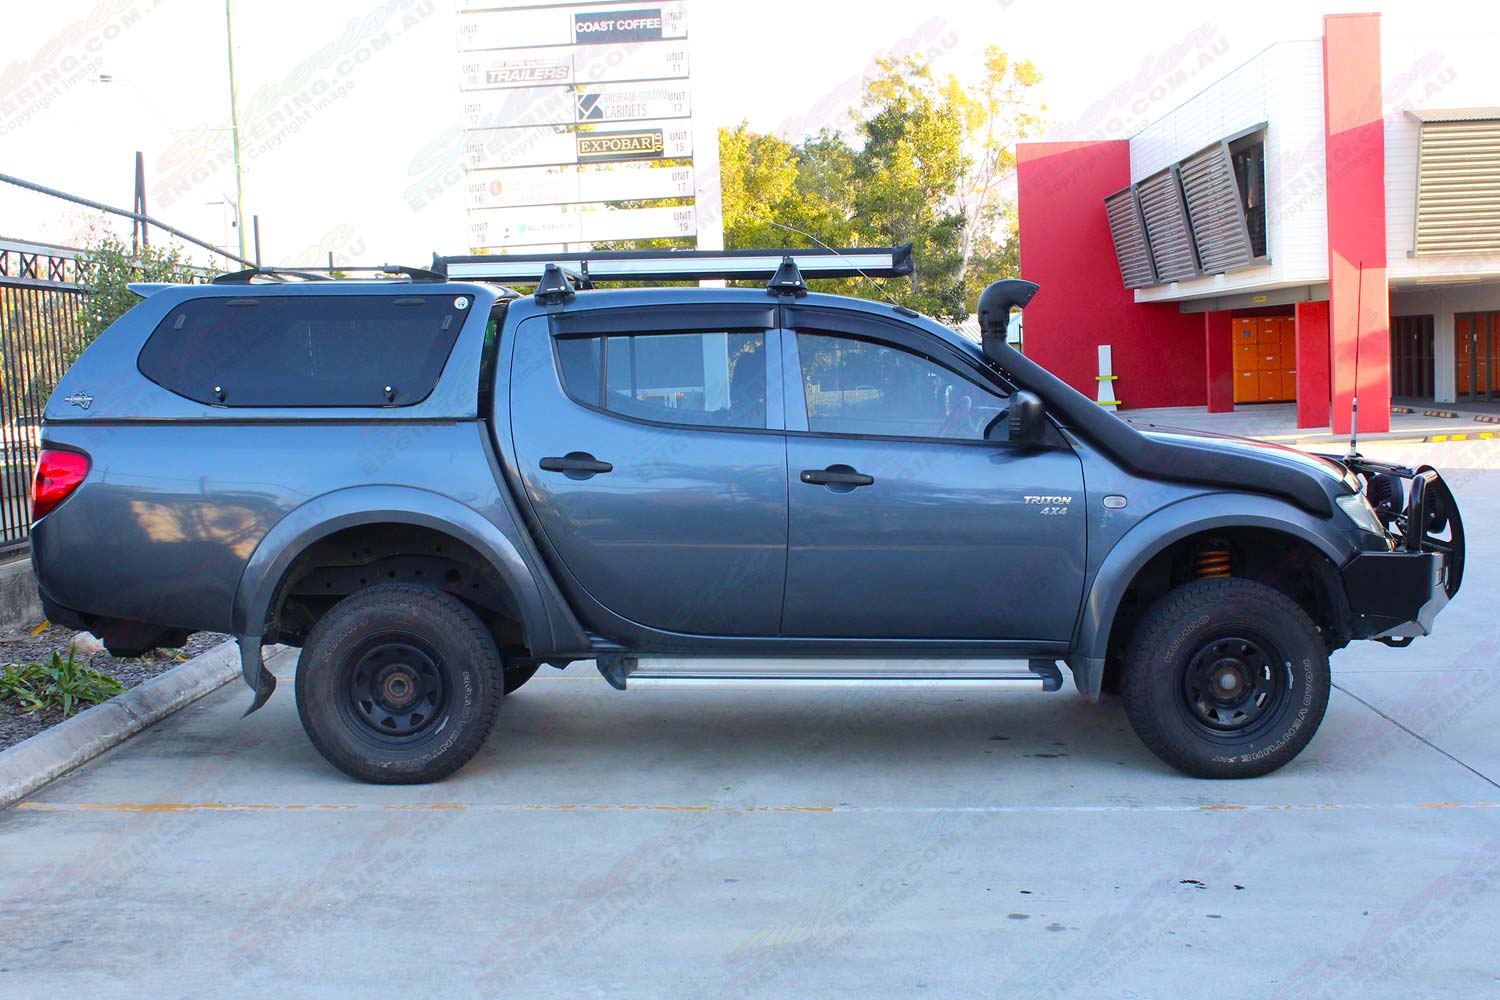 Right side view of a grey MN Mitsubishi Triton (Dual Cab) fitted with an 40mm Ironman lift kit and airforce snorkel